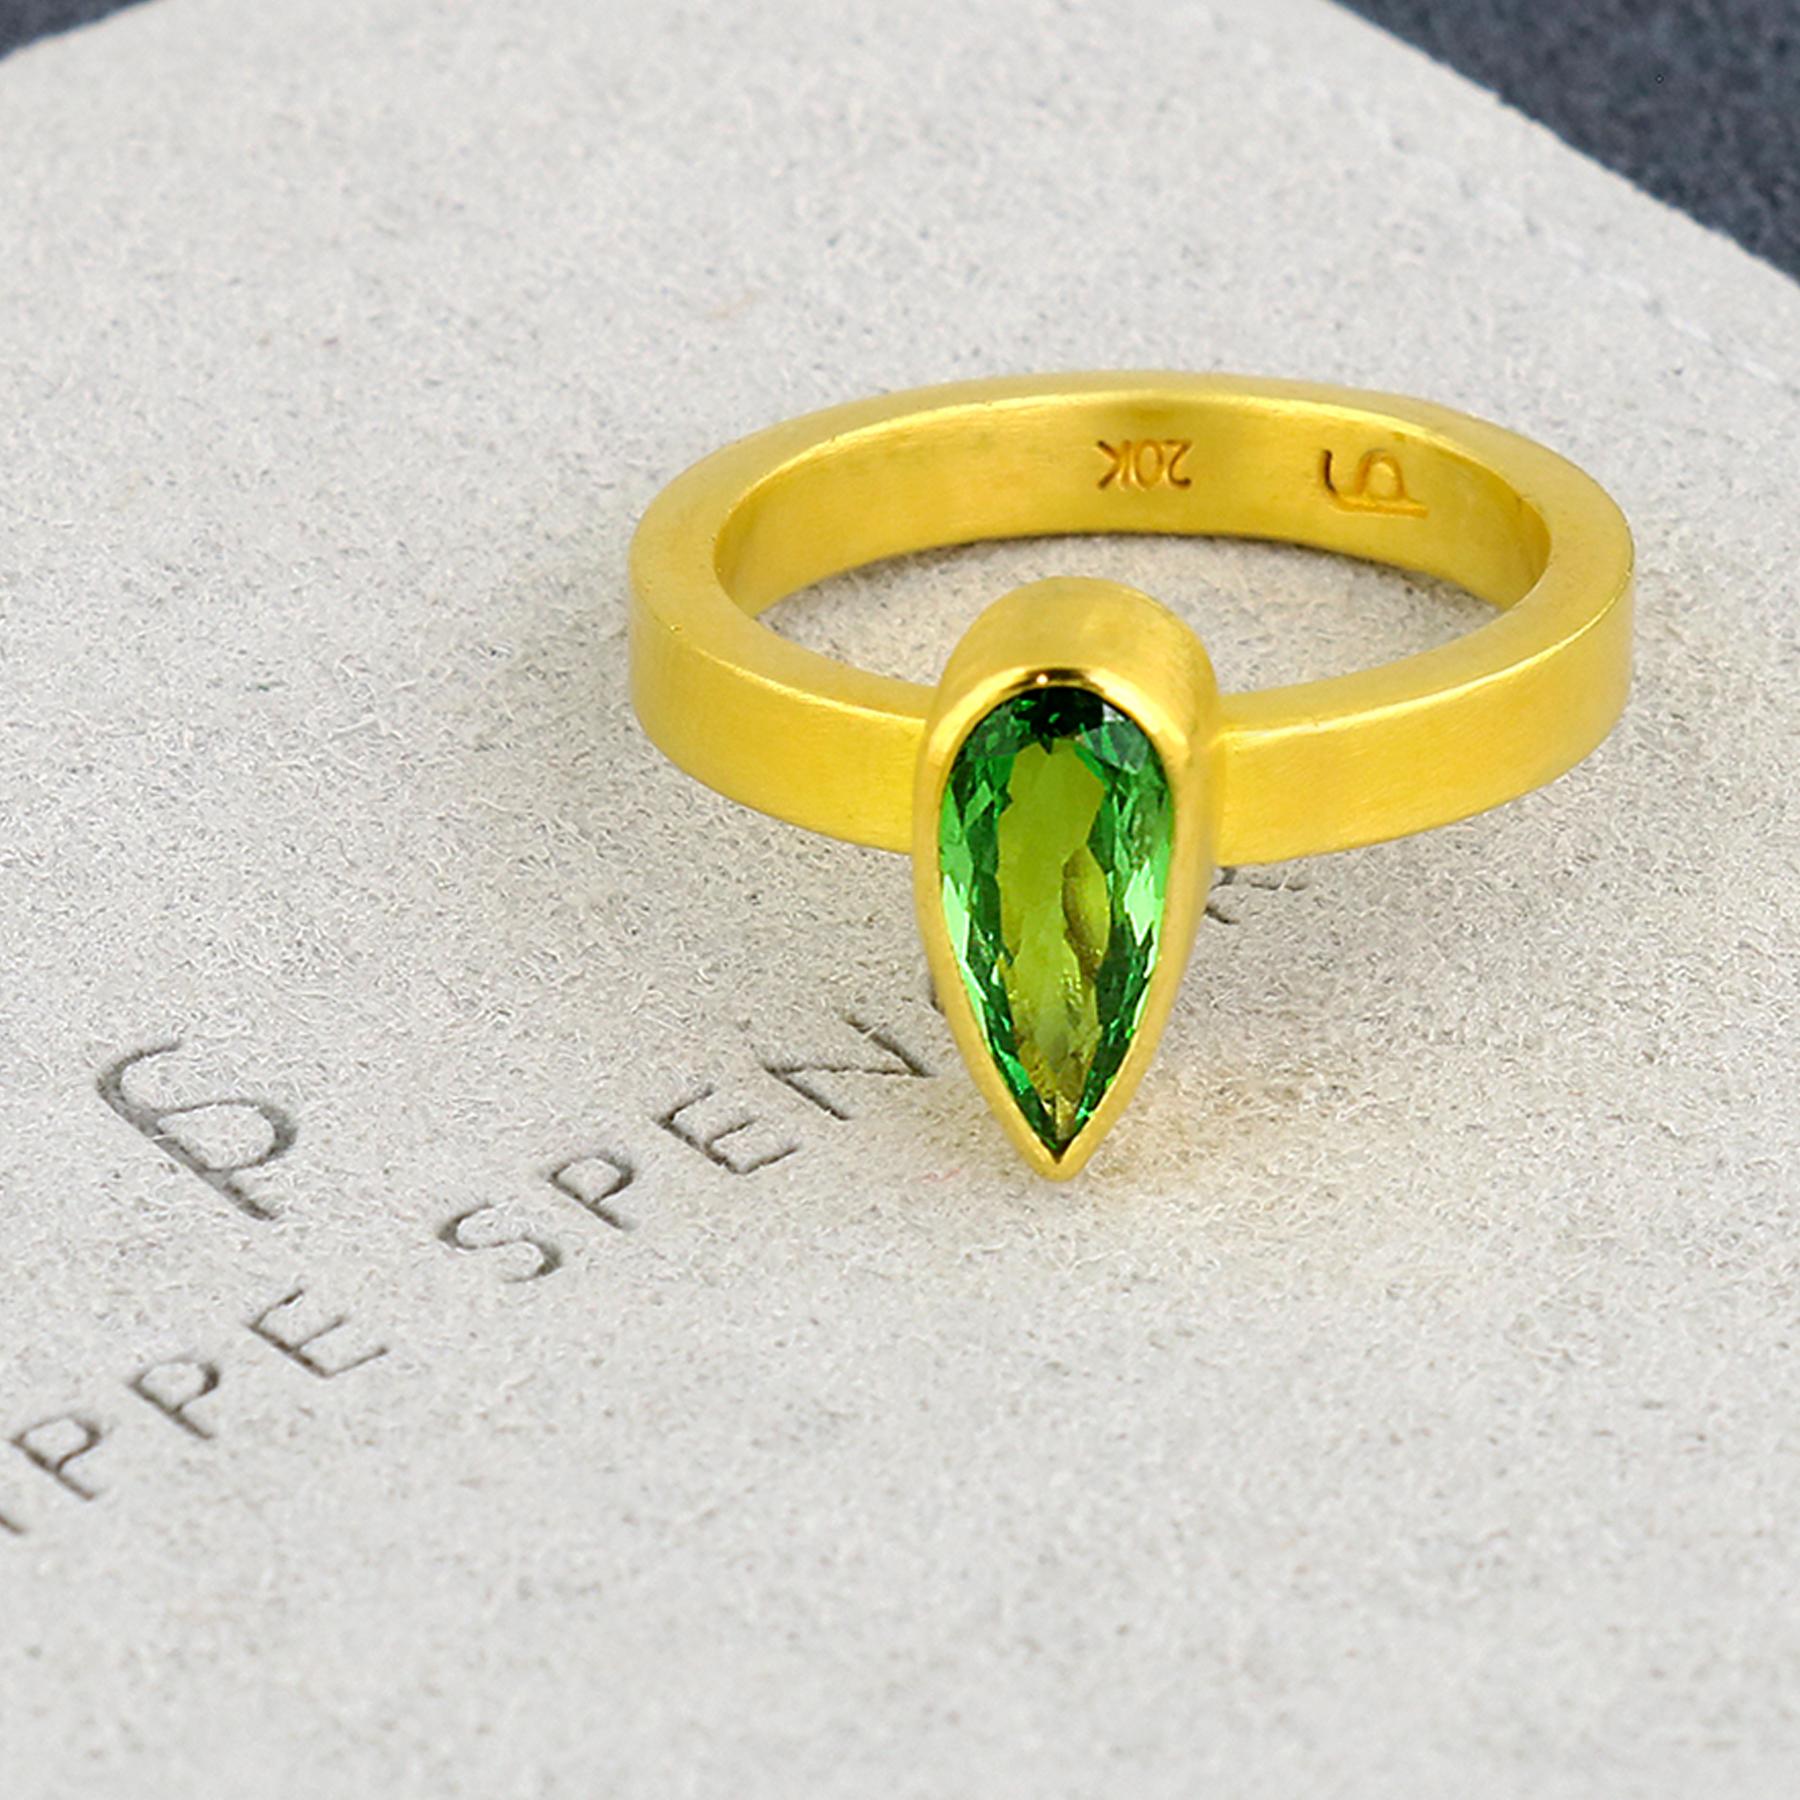 PHILIPPE SPENCER - Rare 1.02 Ct. Bright Green Tsavorite (Green Garnet)  wrapped in 22K Gold with Solid 20K Gold Hand & Anvil-Forged  Statement Ring. Heavy Brushed Exterior, Polished Interior Finish. Size 7, and is in-stock and ready to ship. Our